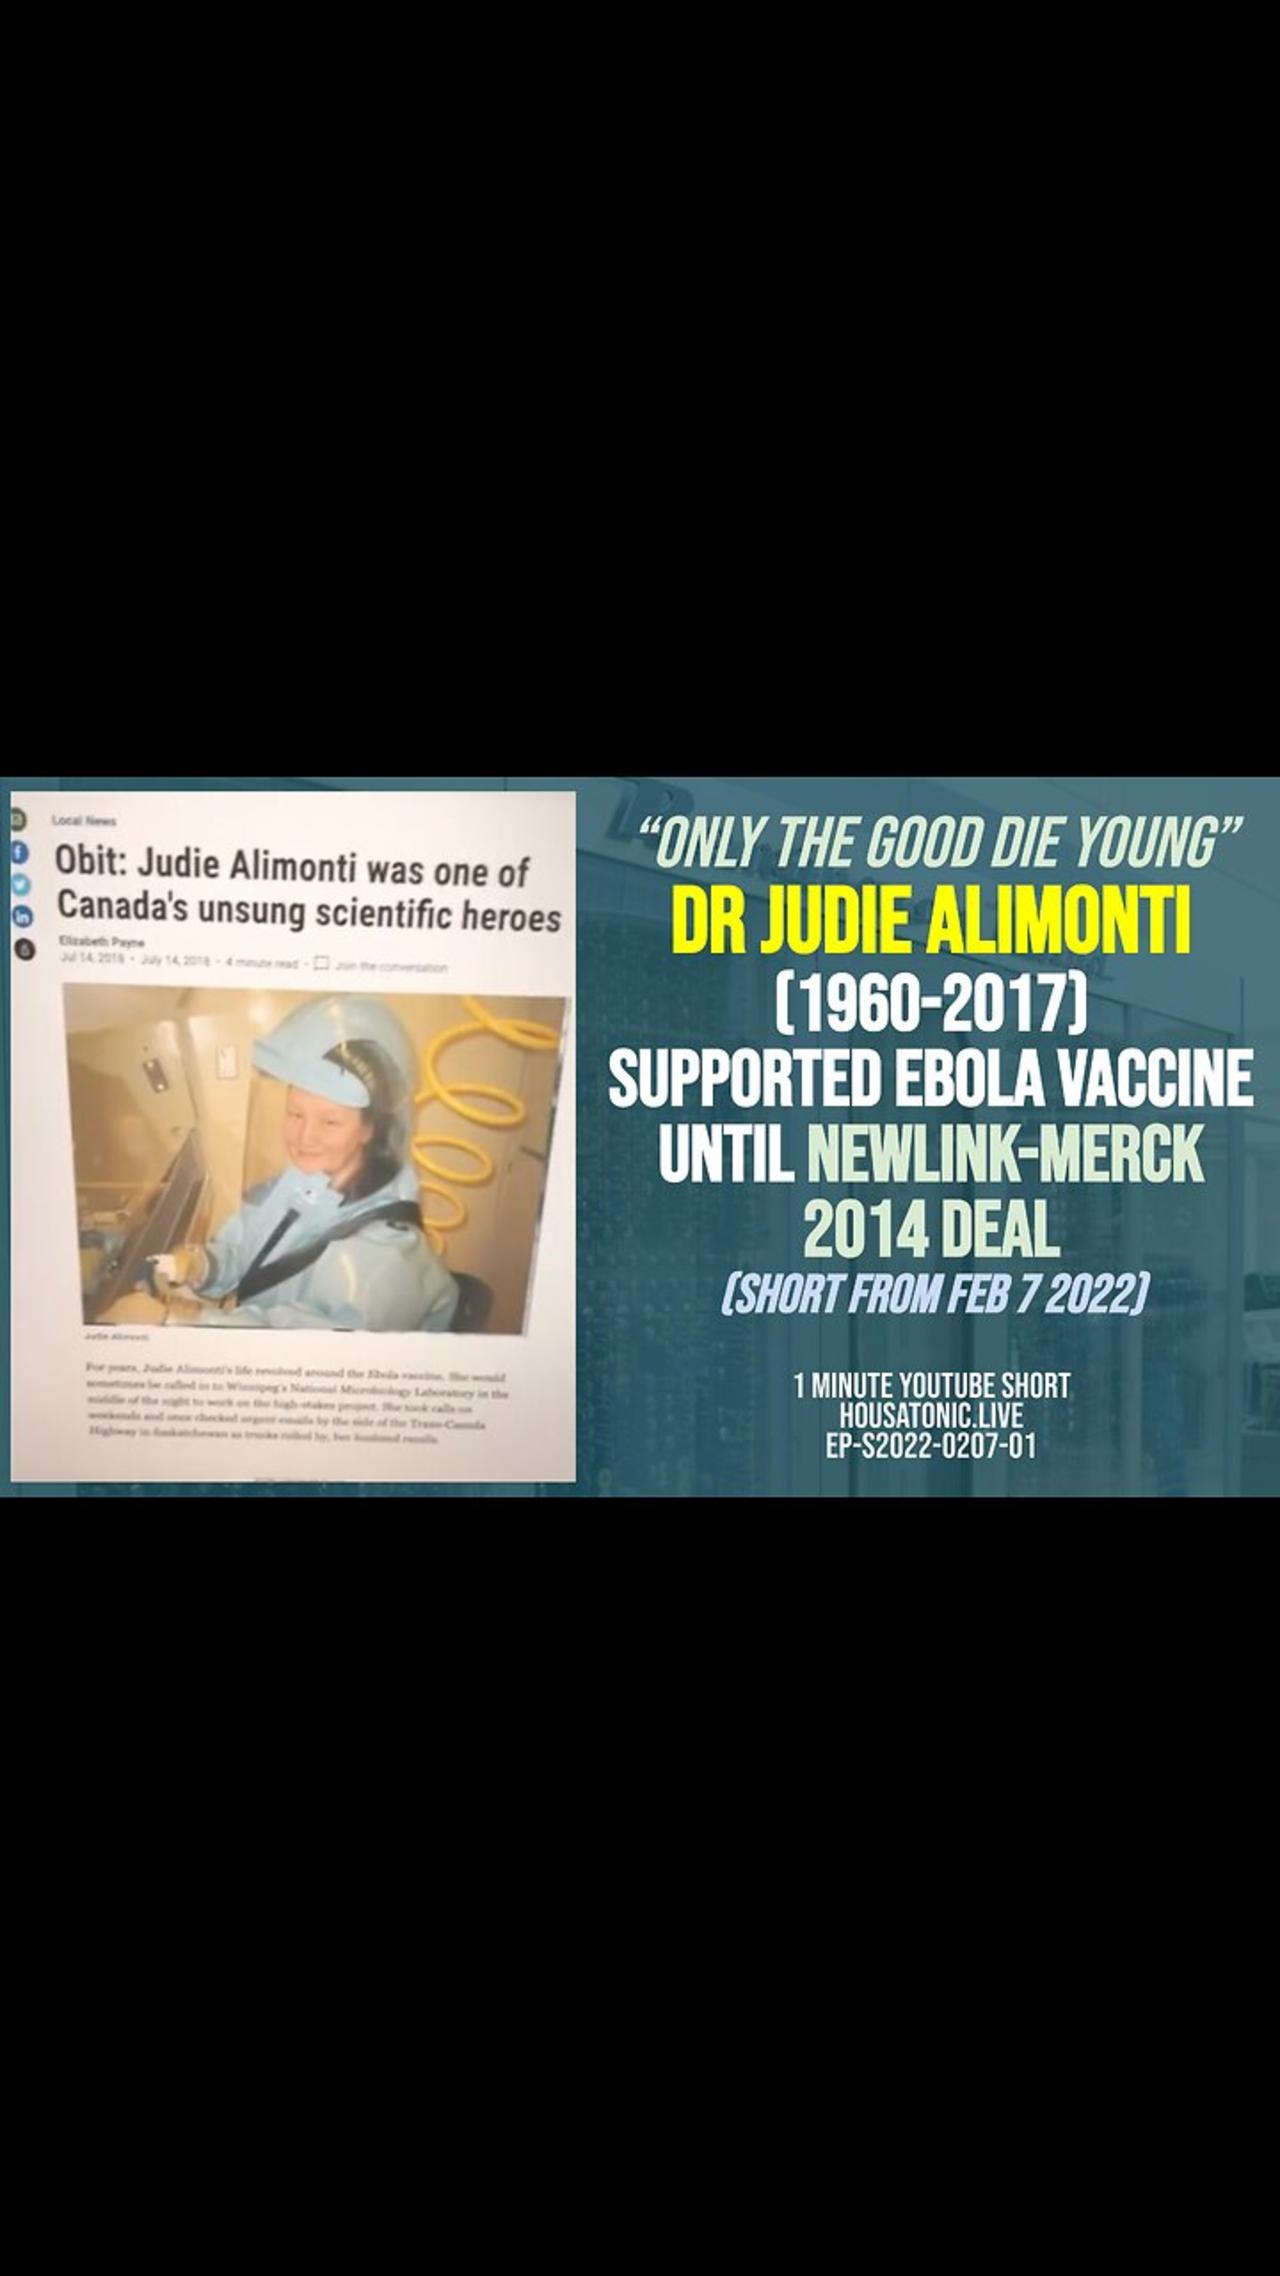 Good die young: Dr Judie Alimonti (1960-2017) supported Ebola vaccine until NewLink-Merck 2014 deal